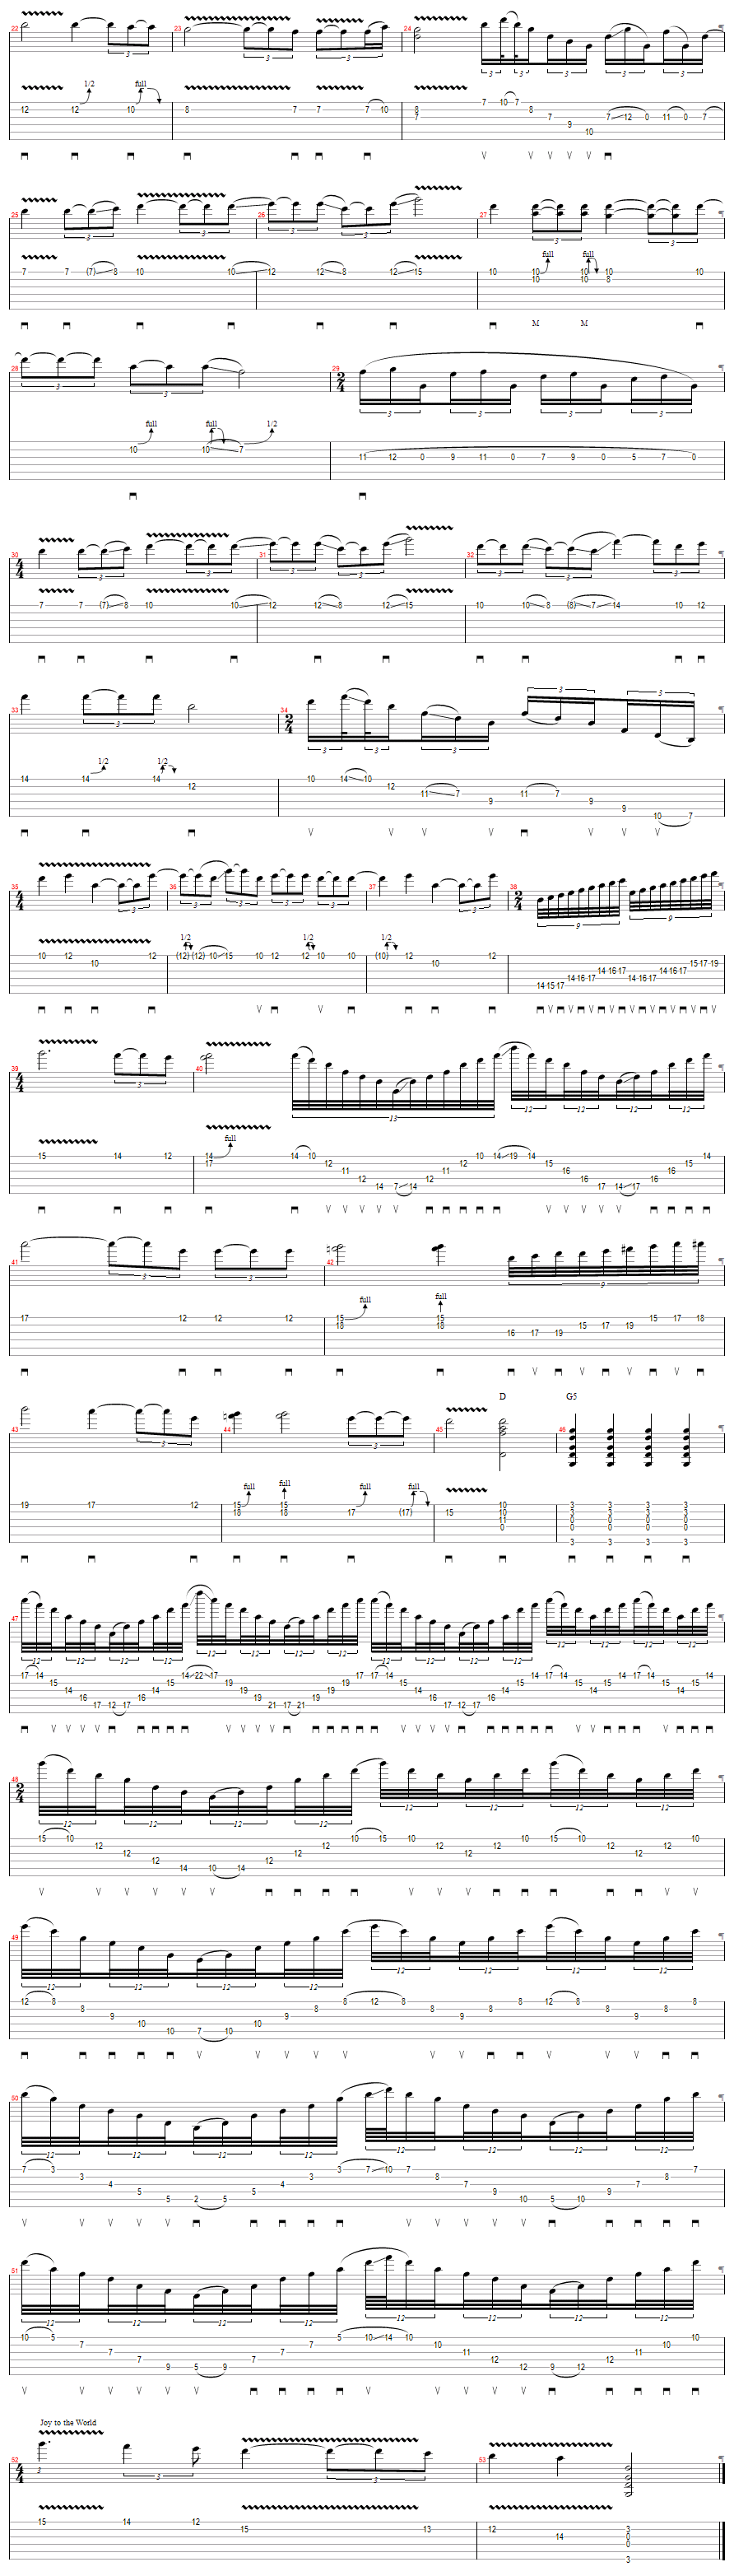 Tablature for O Holy Night - Part II